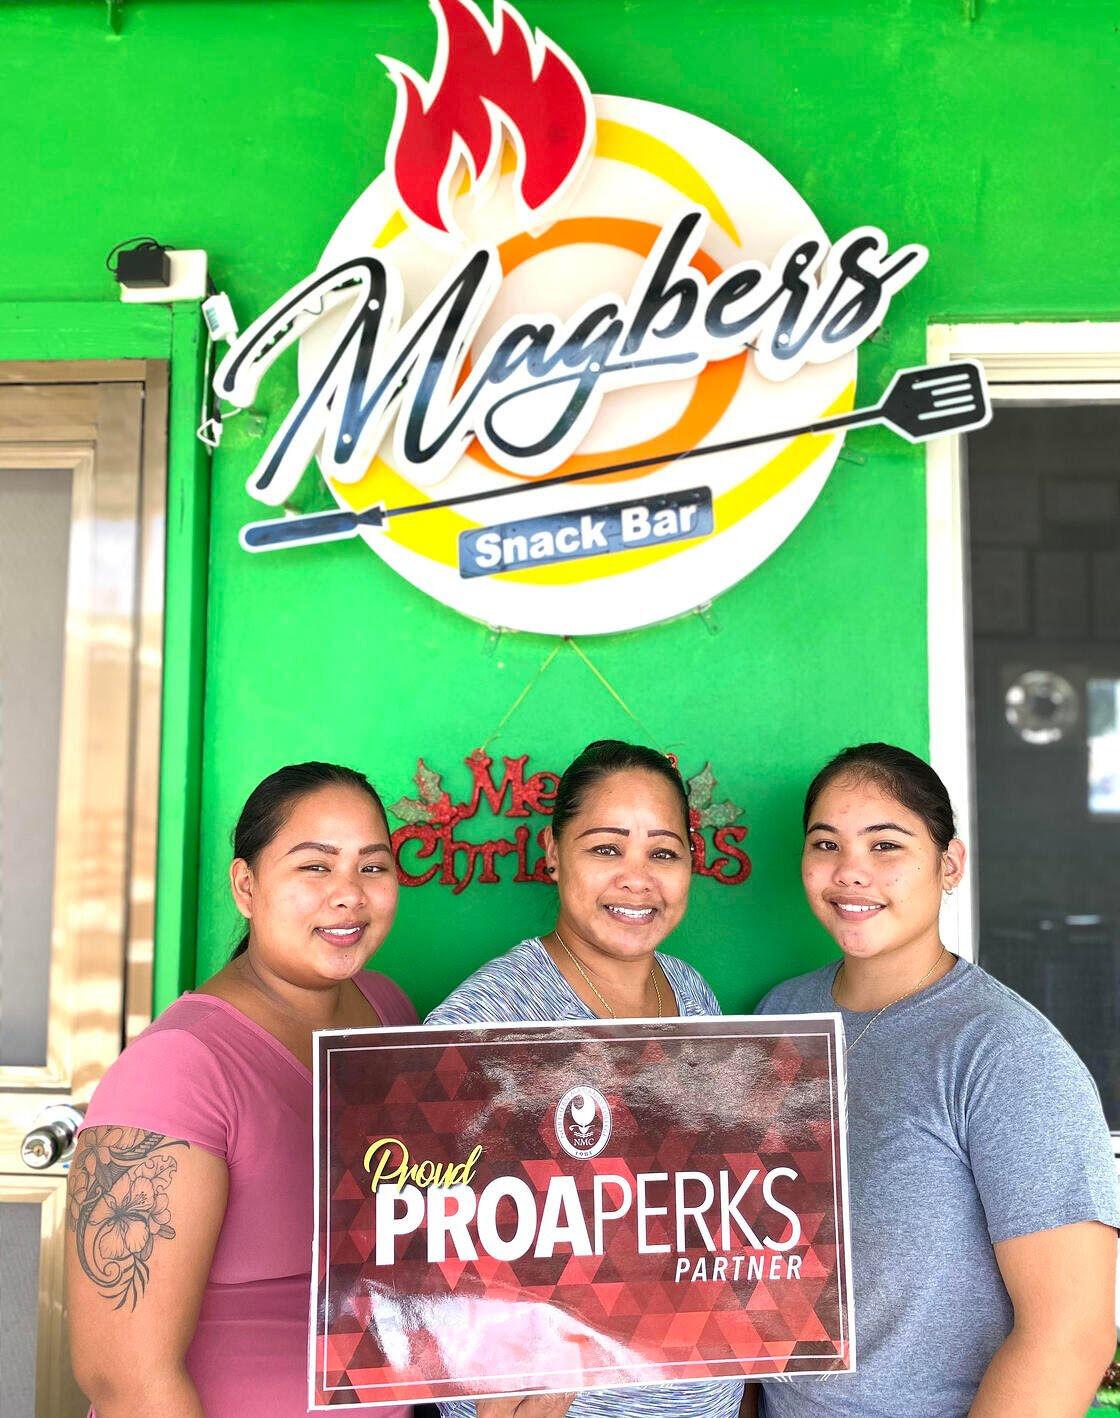 Magbers Snack Bar is now a proud NMC ProaPerks partner. All card-carrying members of the NMC ProaPerks program can get a 10% discount.